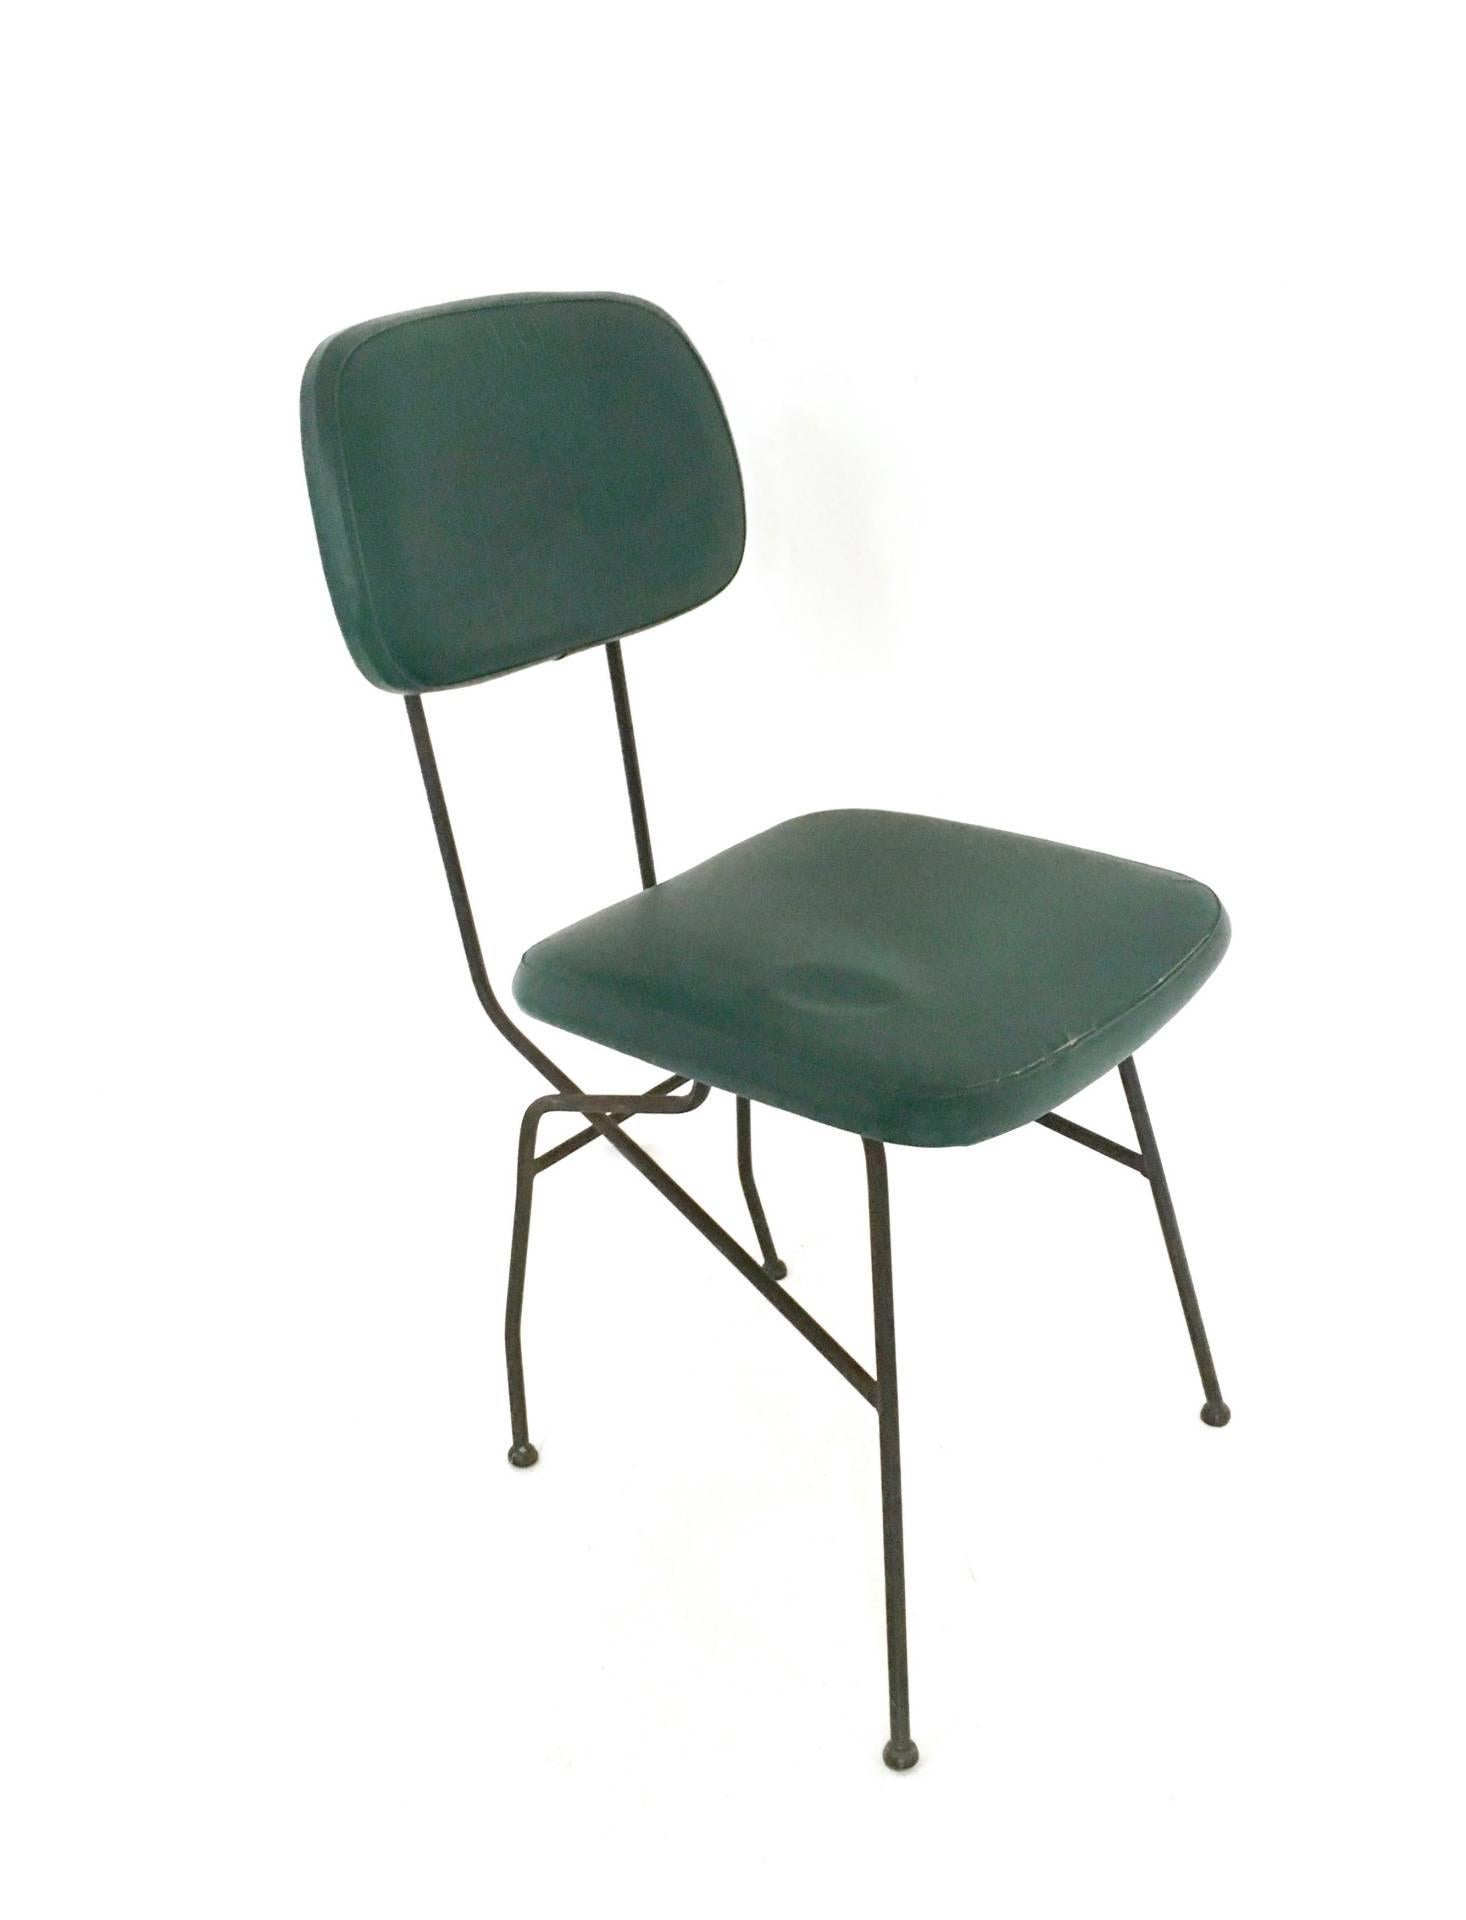 Italian Set of Four Metal and Skai Chairs Ascribable to Gastone Rinaldi for Rima, 1950s